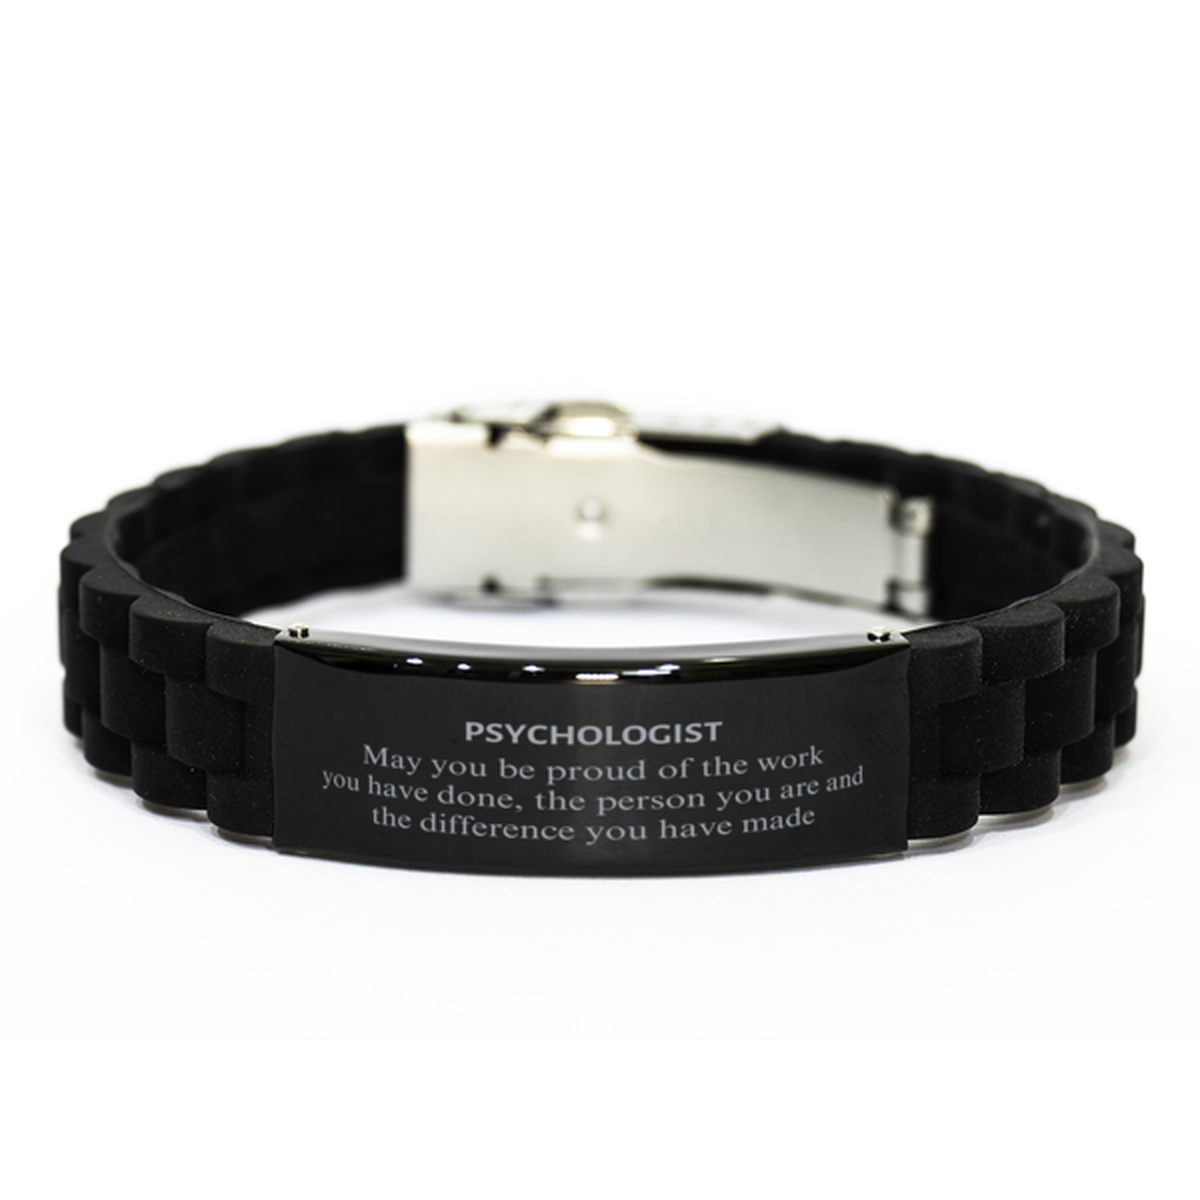 Psychologist May you be proud of the work you have done, Retirement Psychologist Black Glidelock Clasp Bracelet for Colleague Appreciation Gifts Amazing for Psychologist